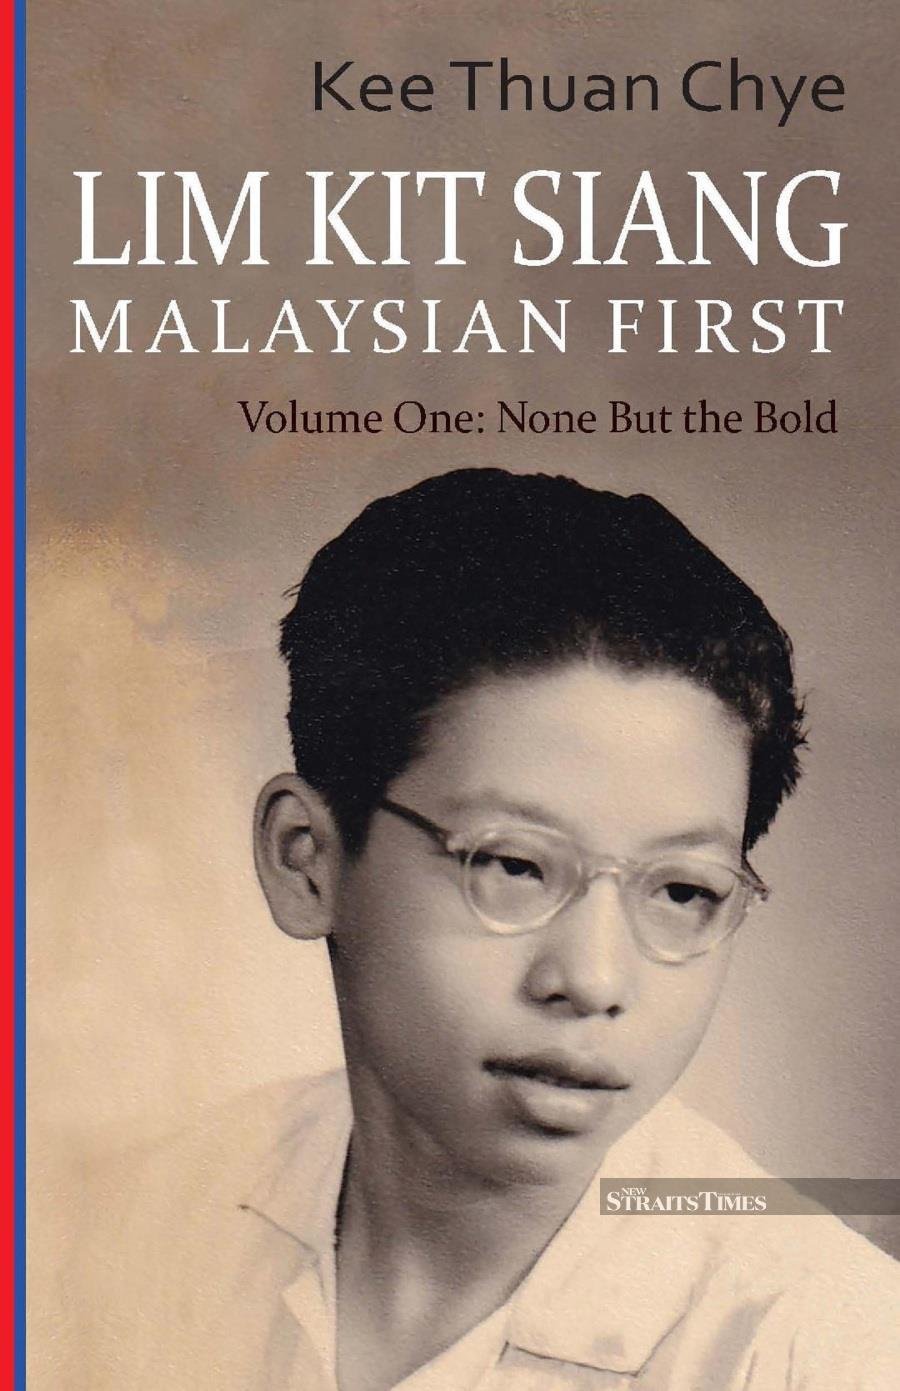  The book documents the life of Lim Kit Siang.